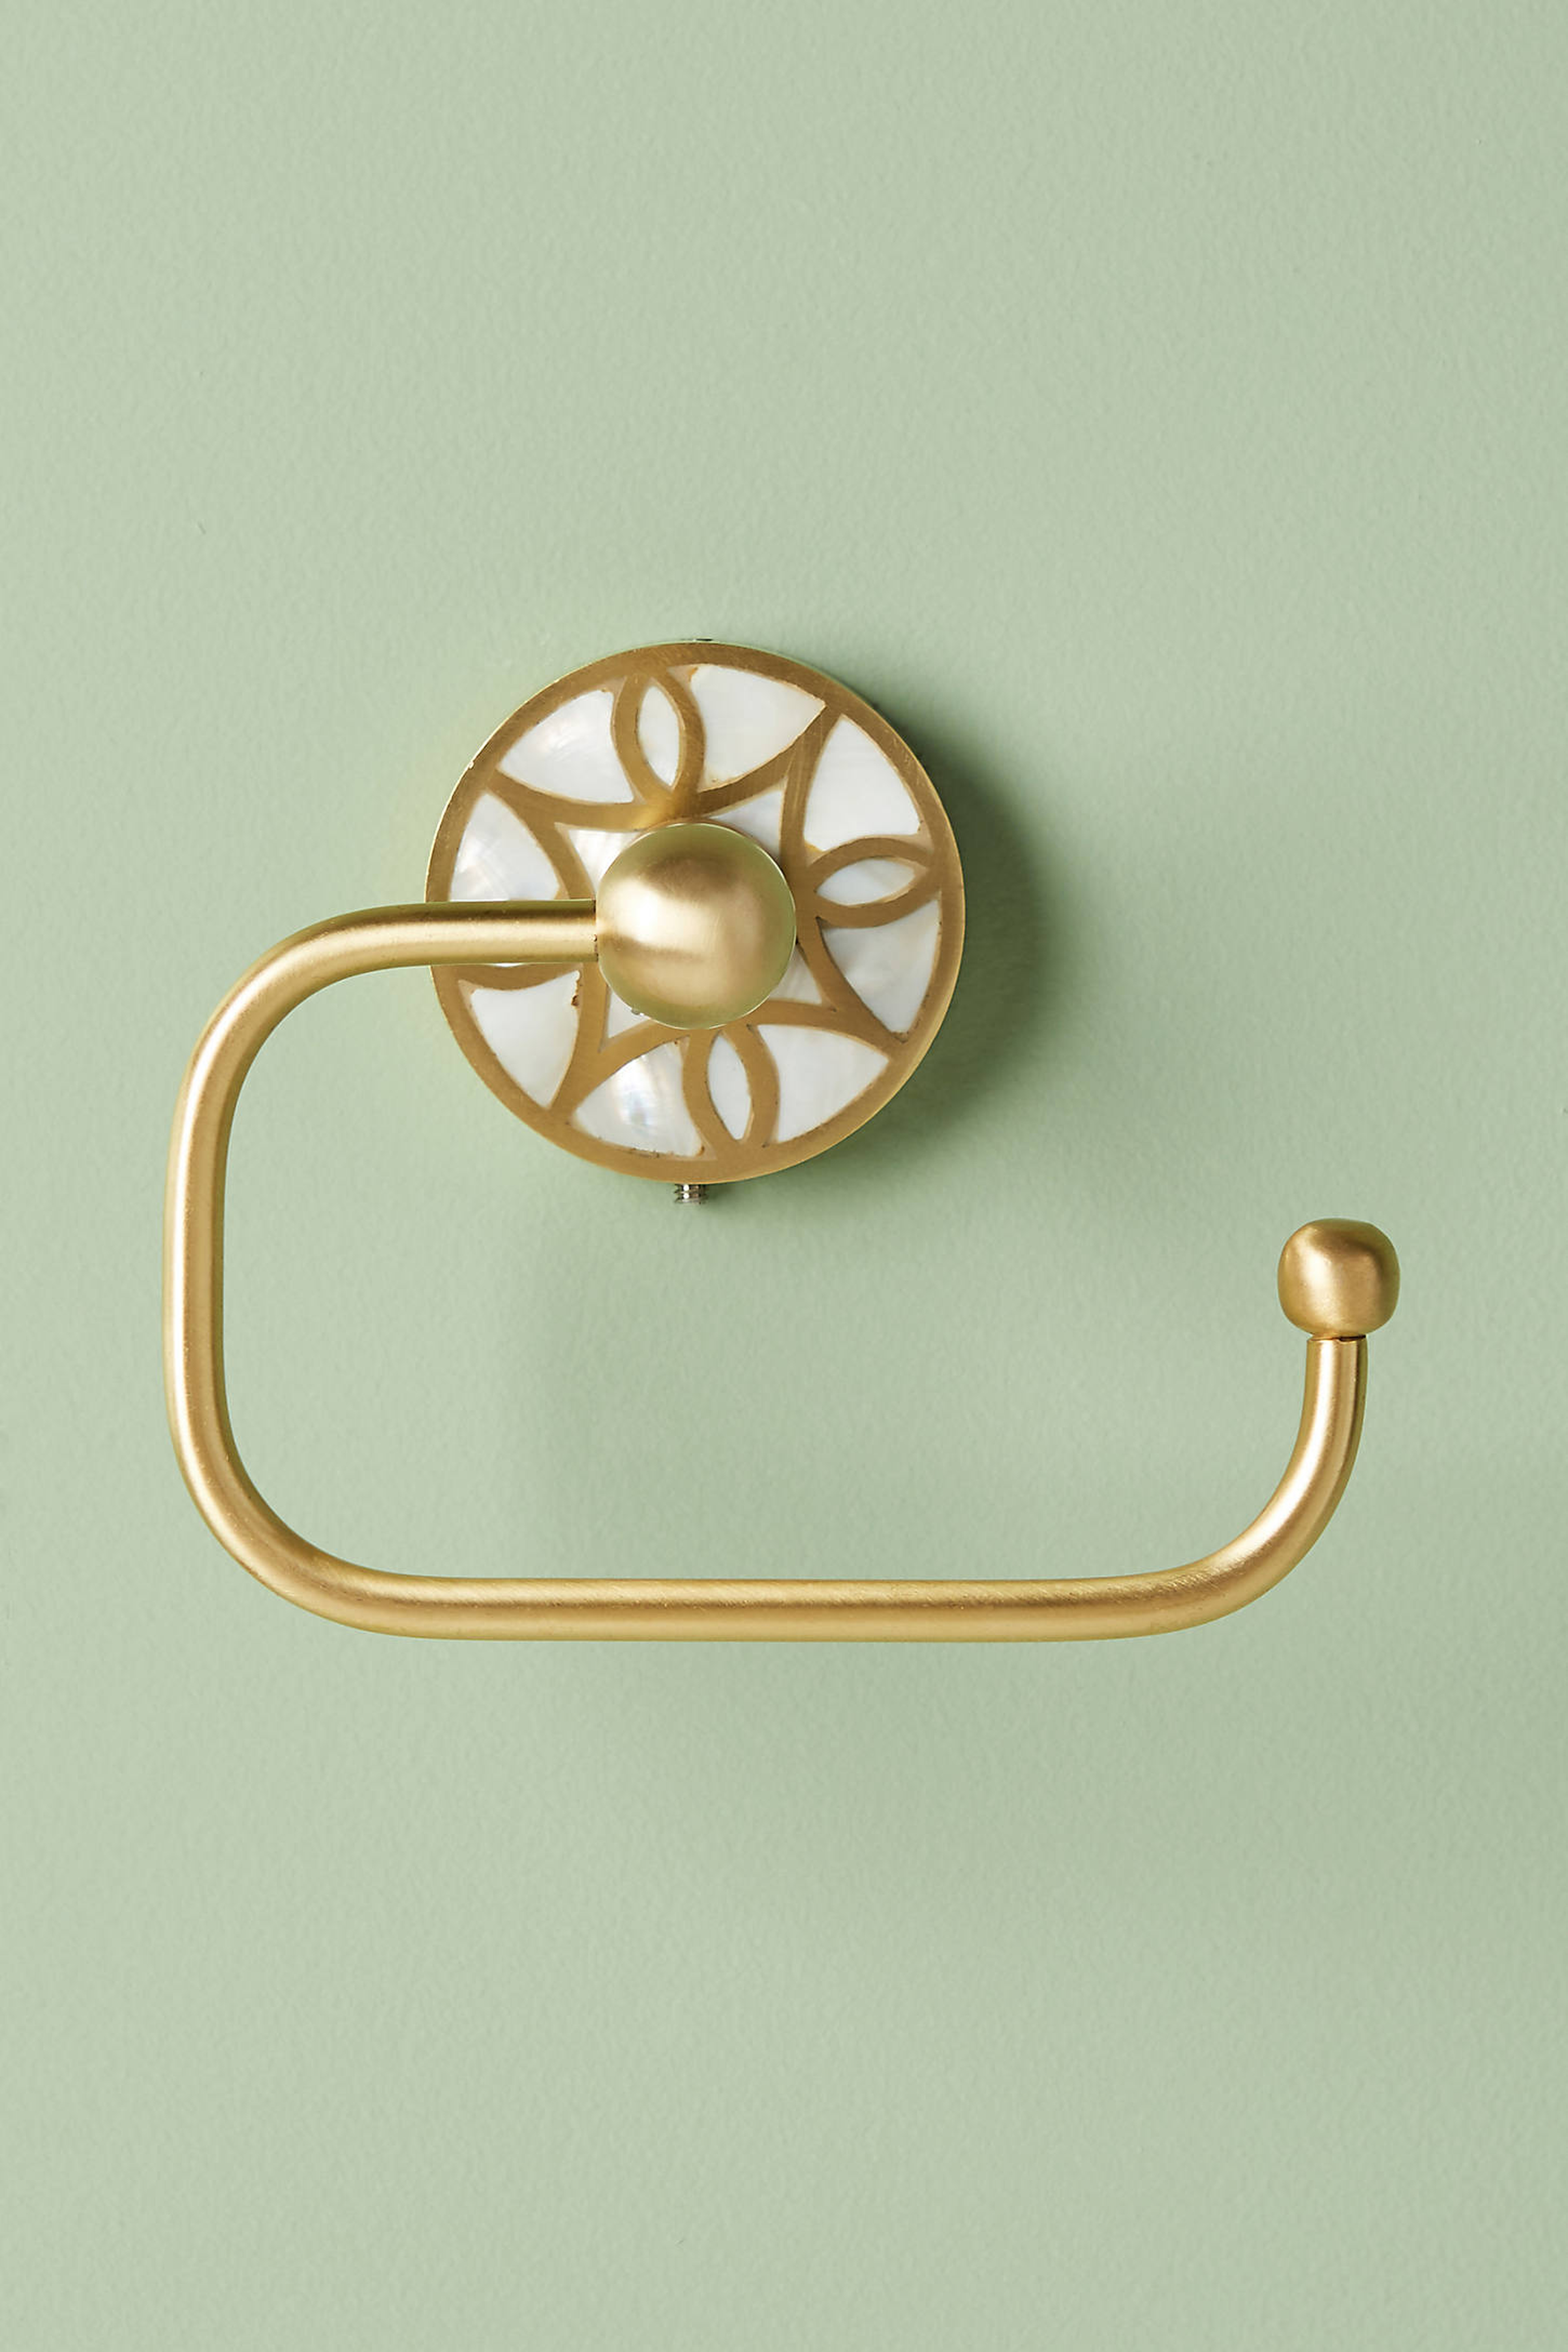 Launis Toilet Paper Holder By Anthropologie in Yellow Size S - Anthropologie